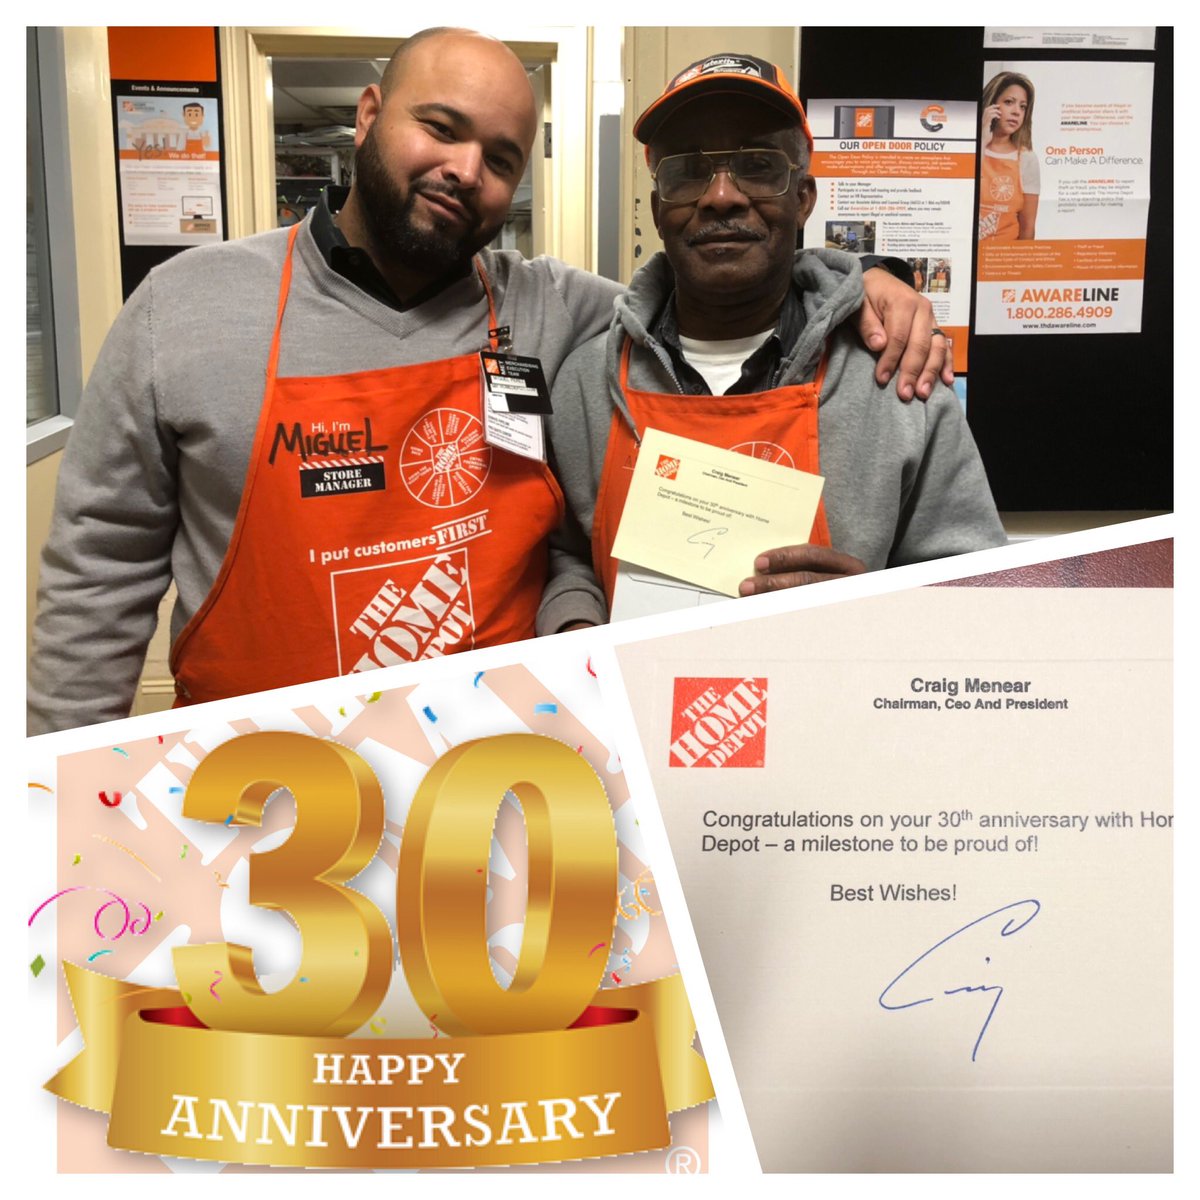 Congratulations to Annex on your 30th anniversary with Home Depot
#BleedingOrange